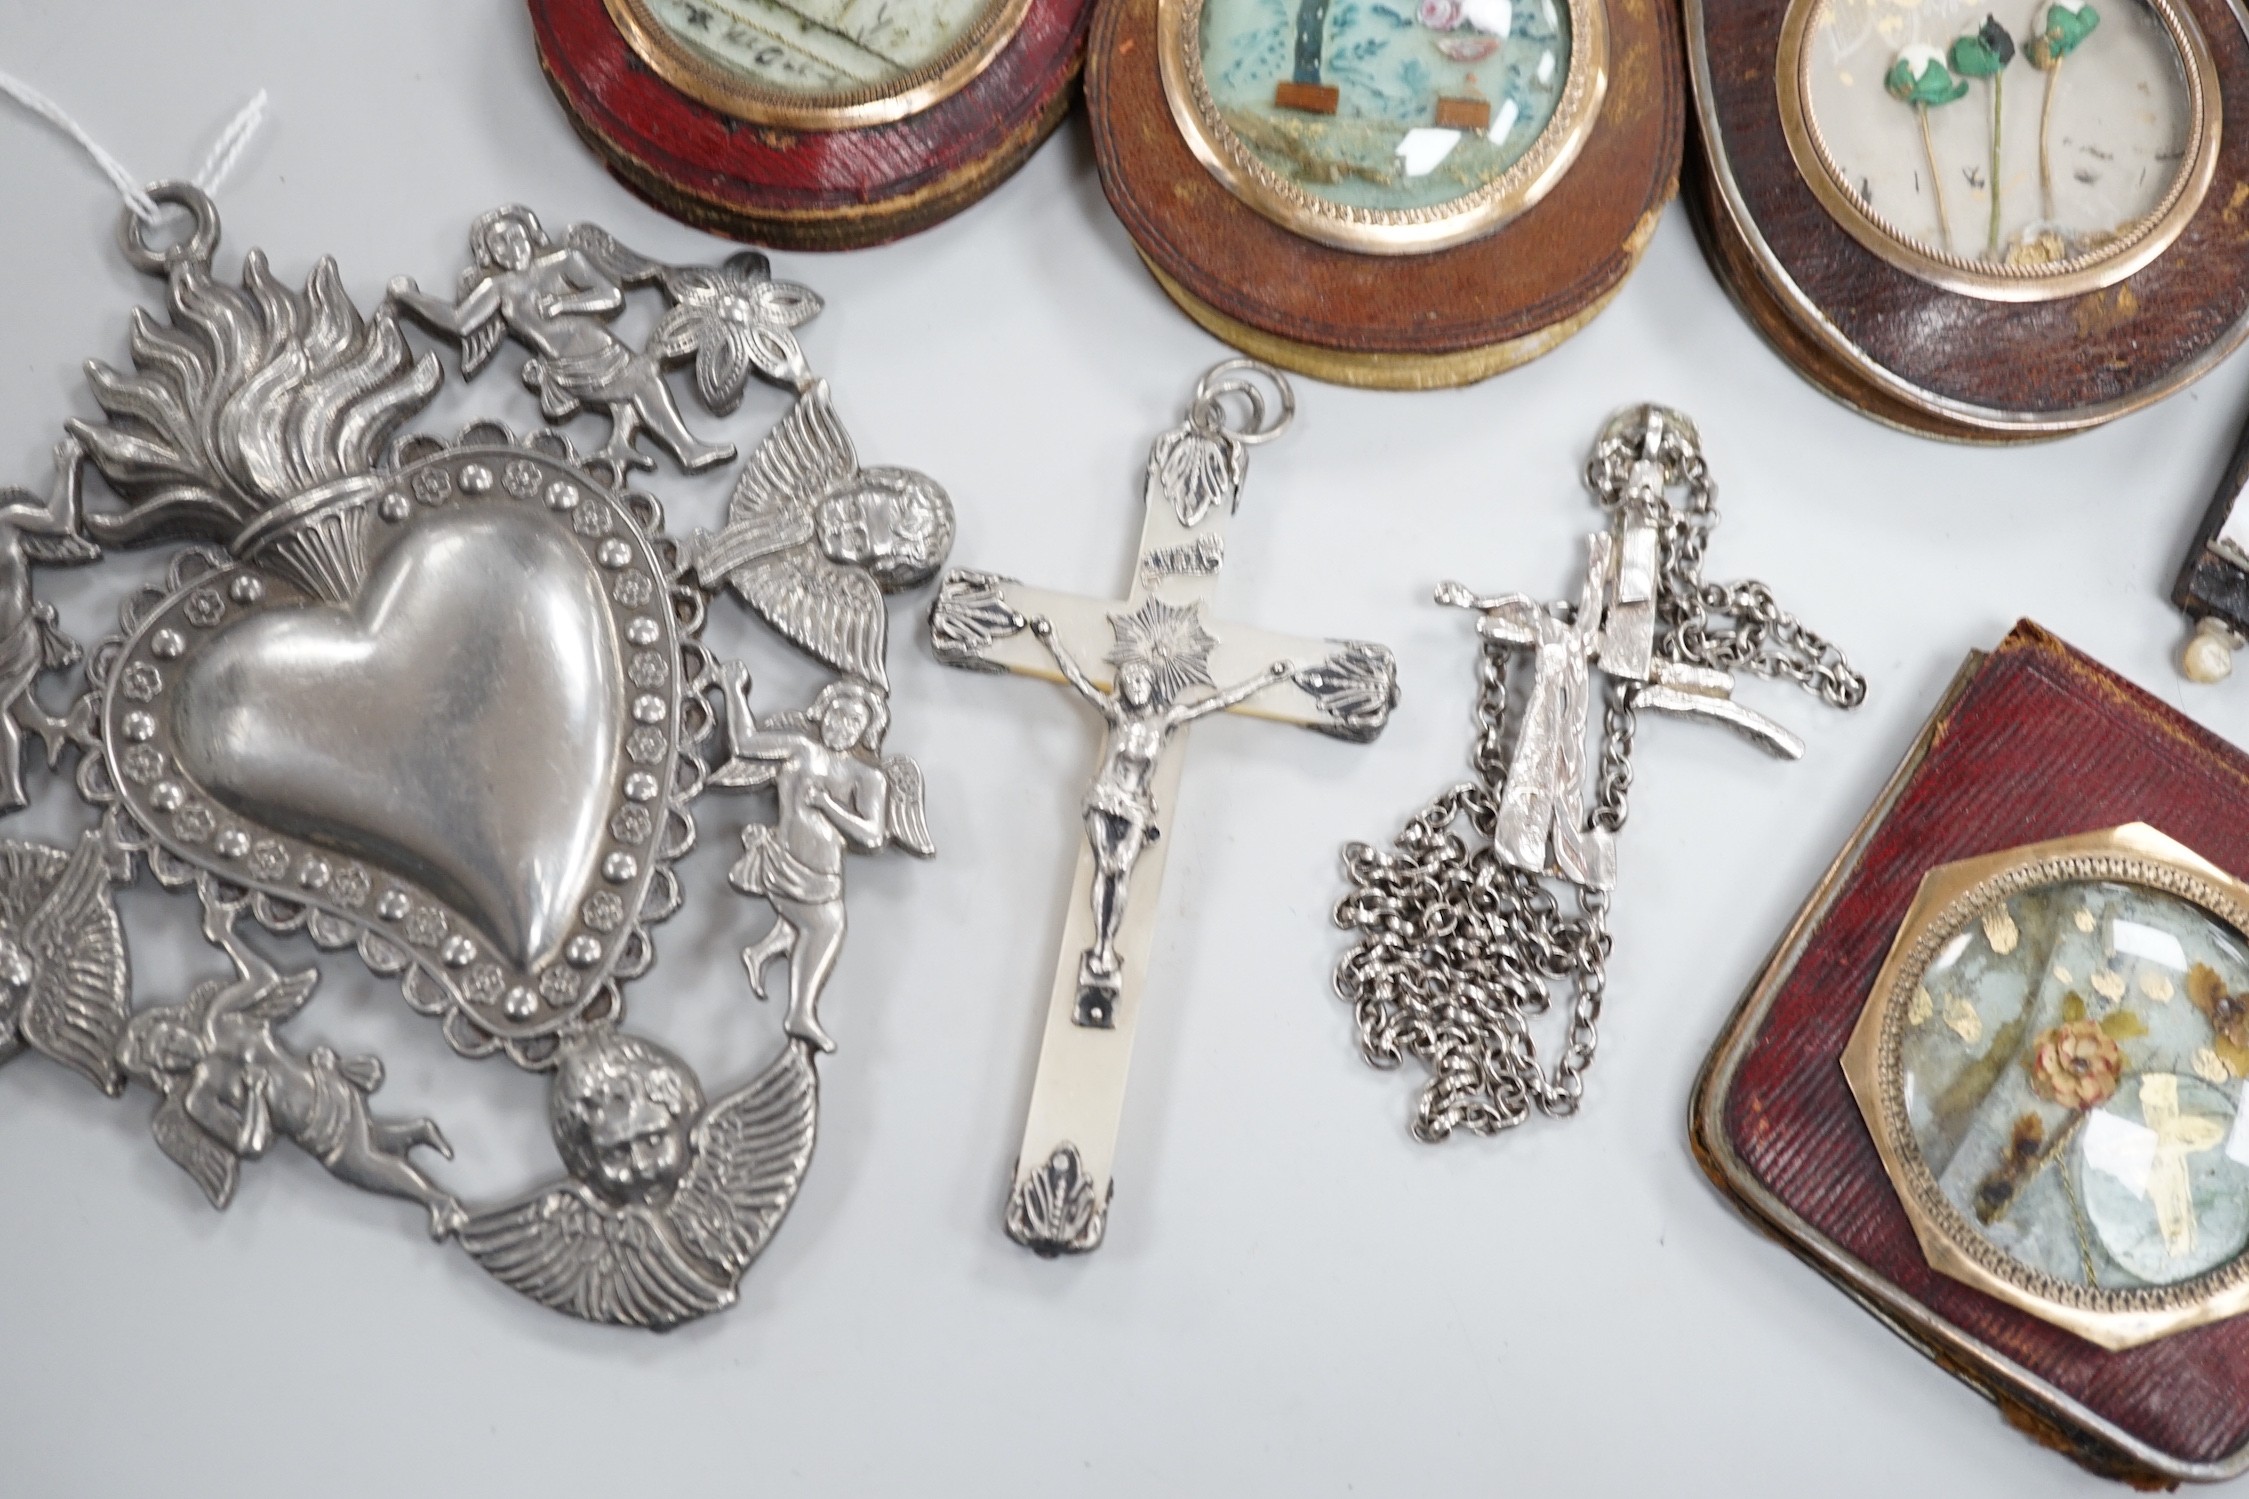 A group of catholic related collectables including Corpus Christi, rosary bead holders etc.